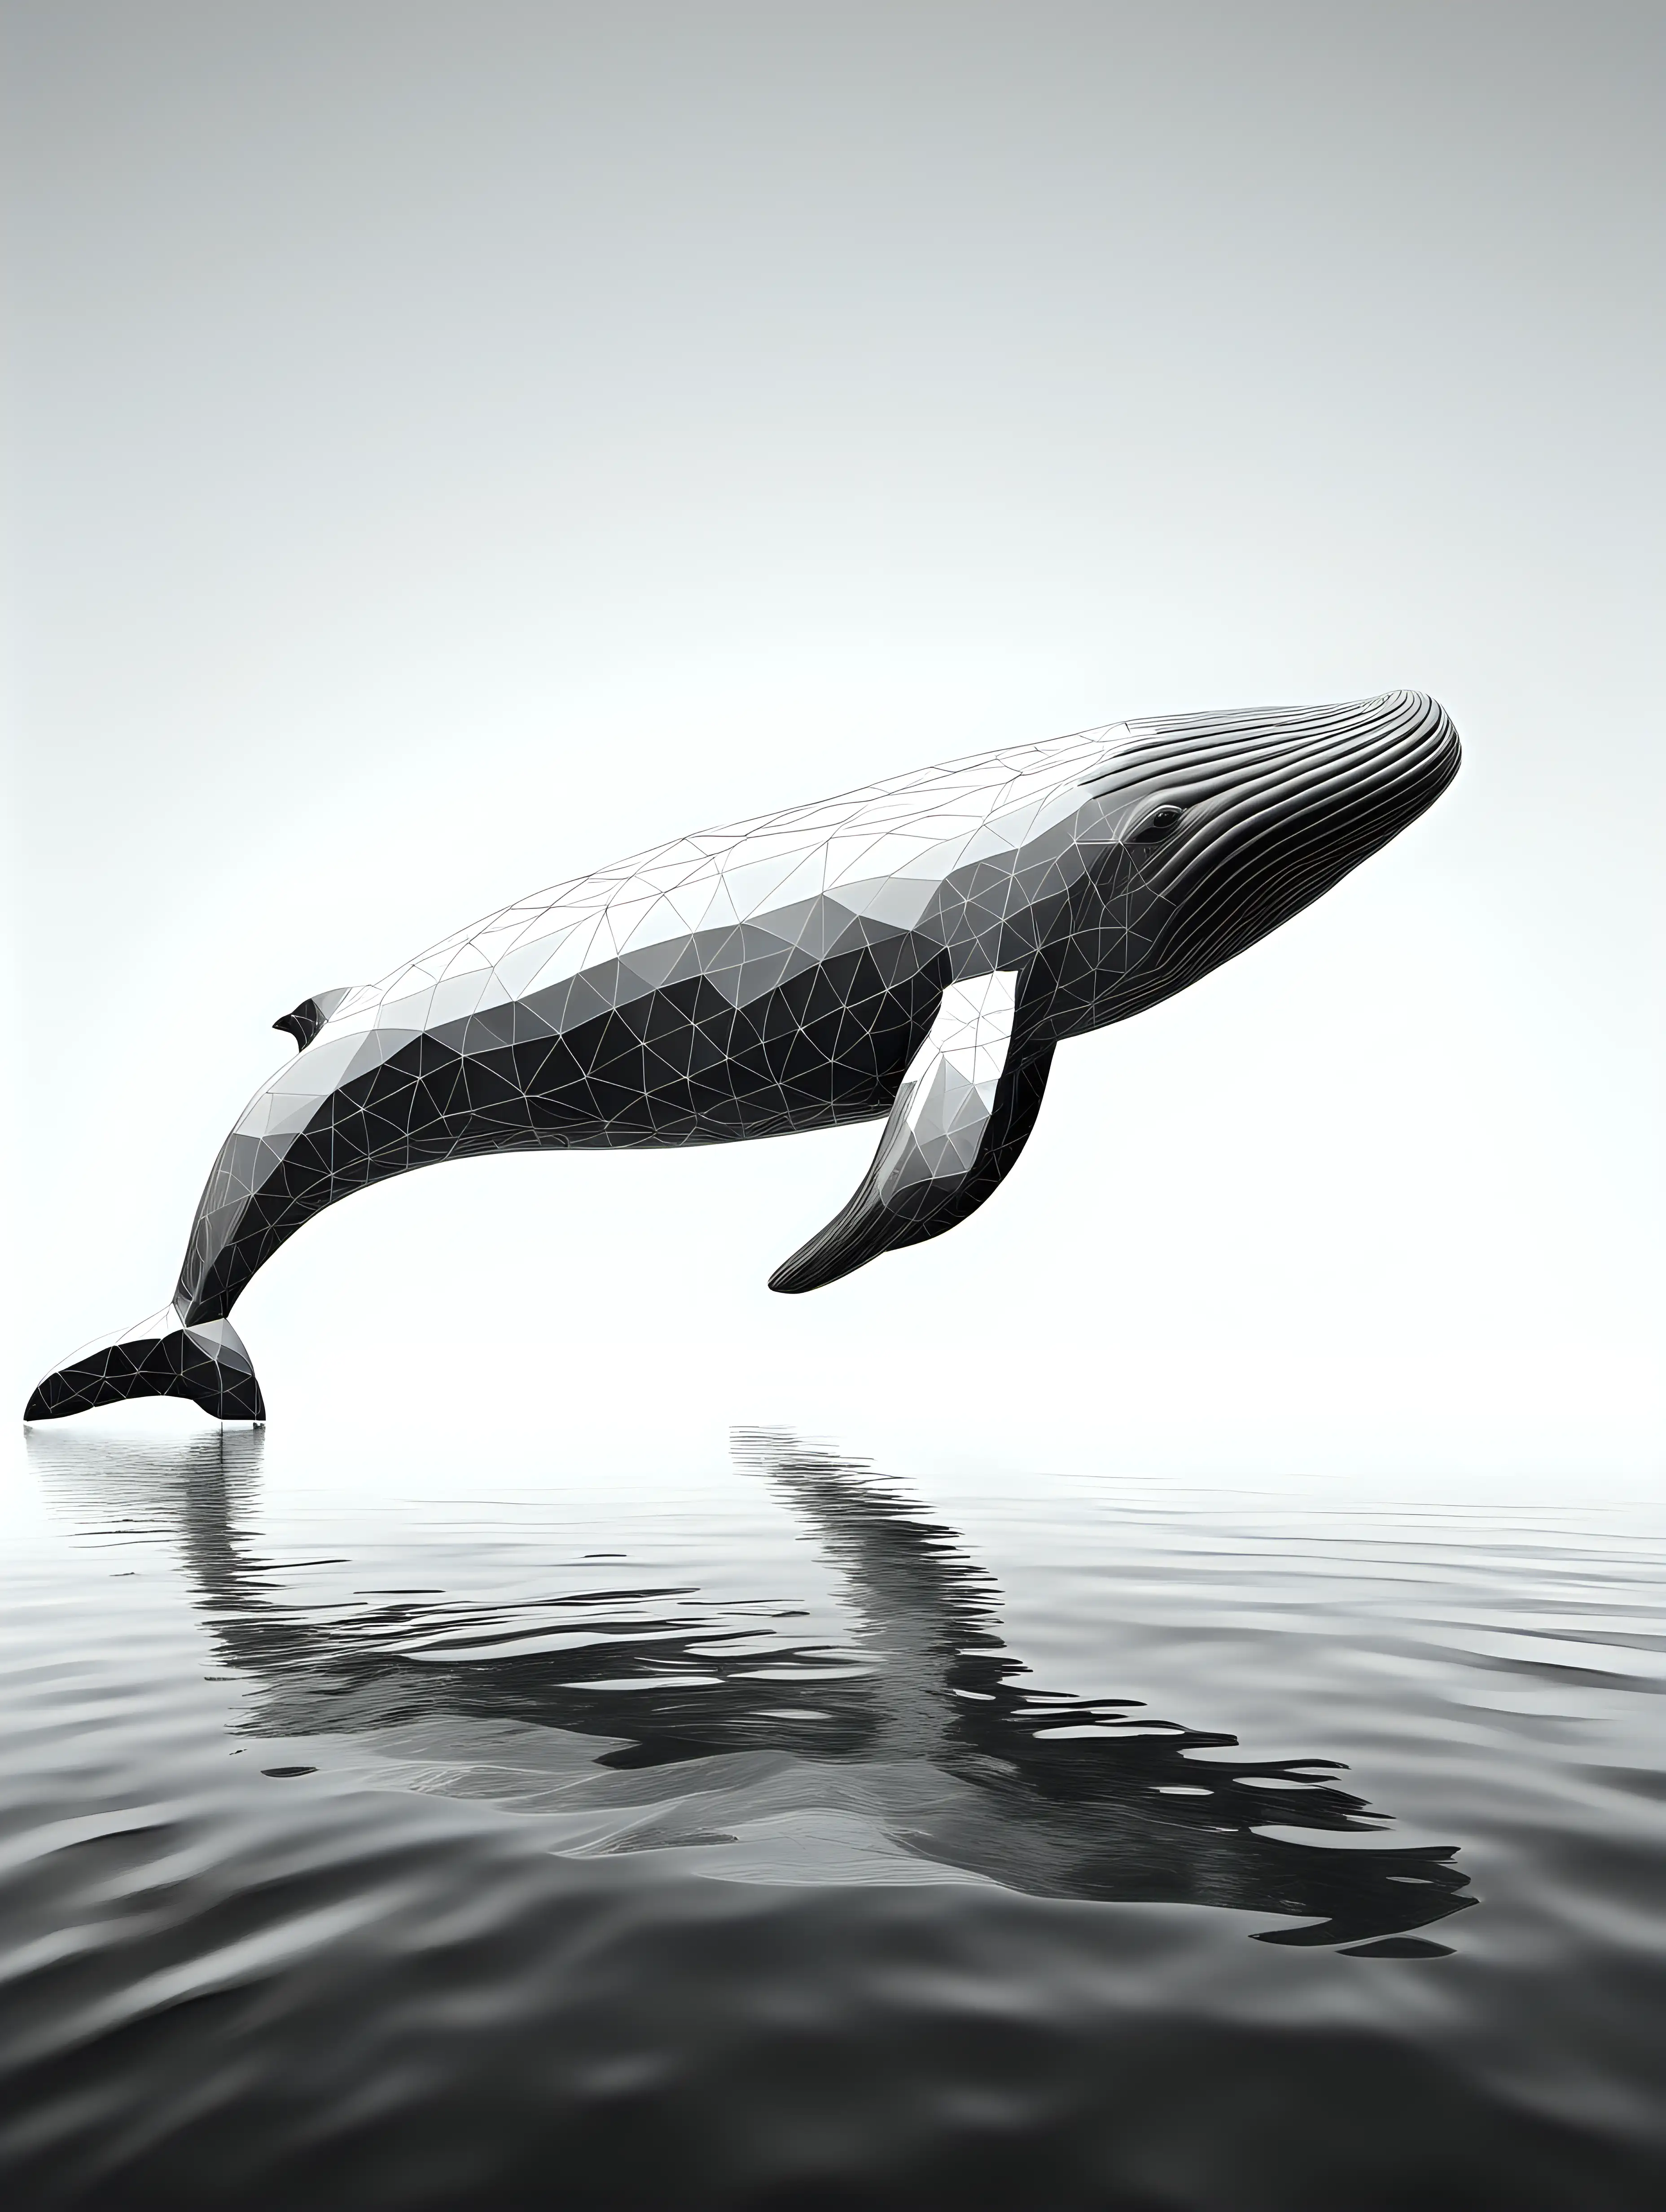 Abstract Geometric Sperm Whale Artwork in Monochrome